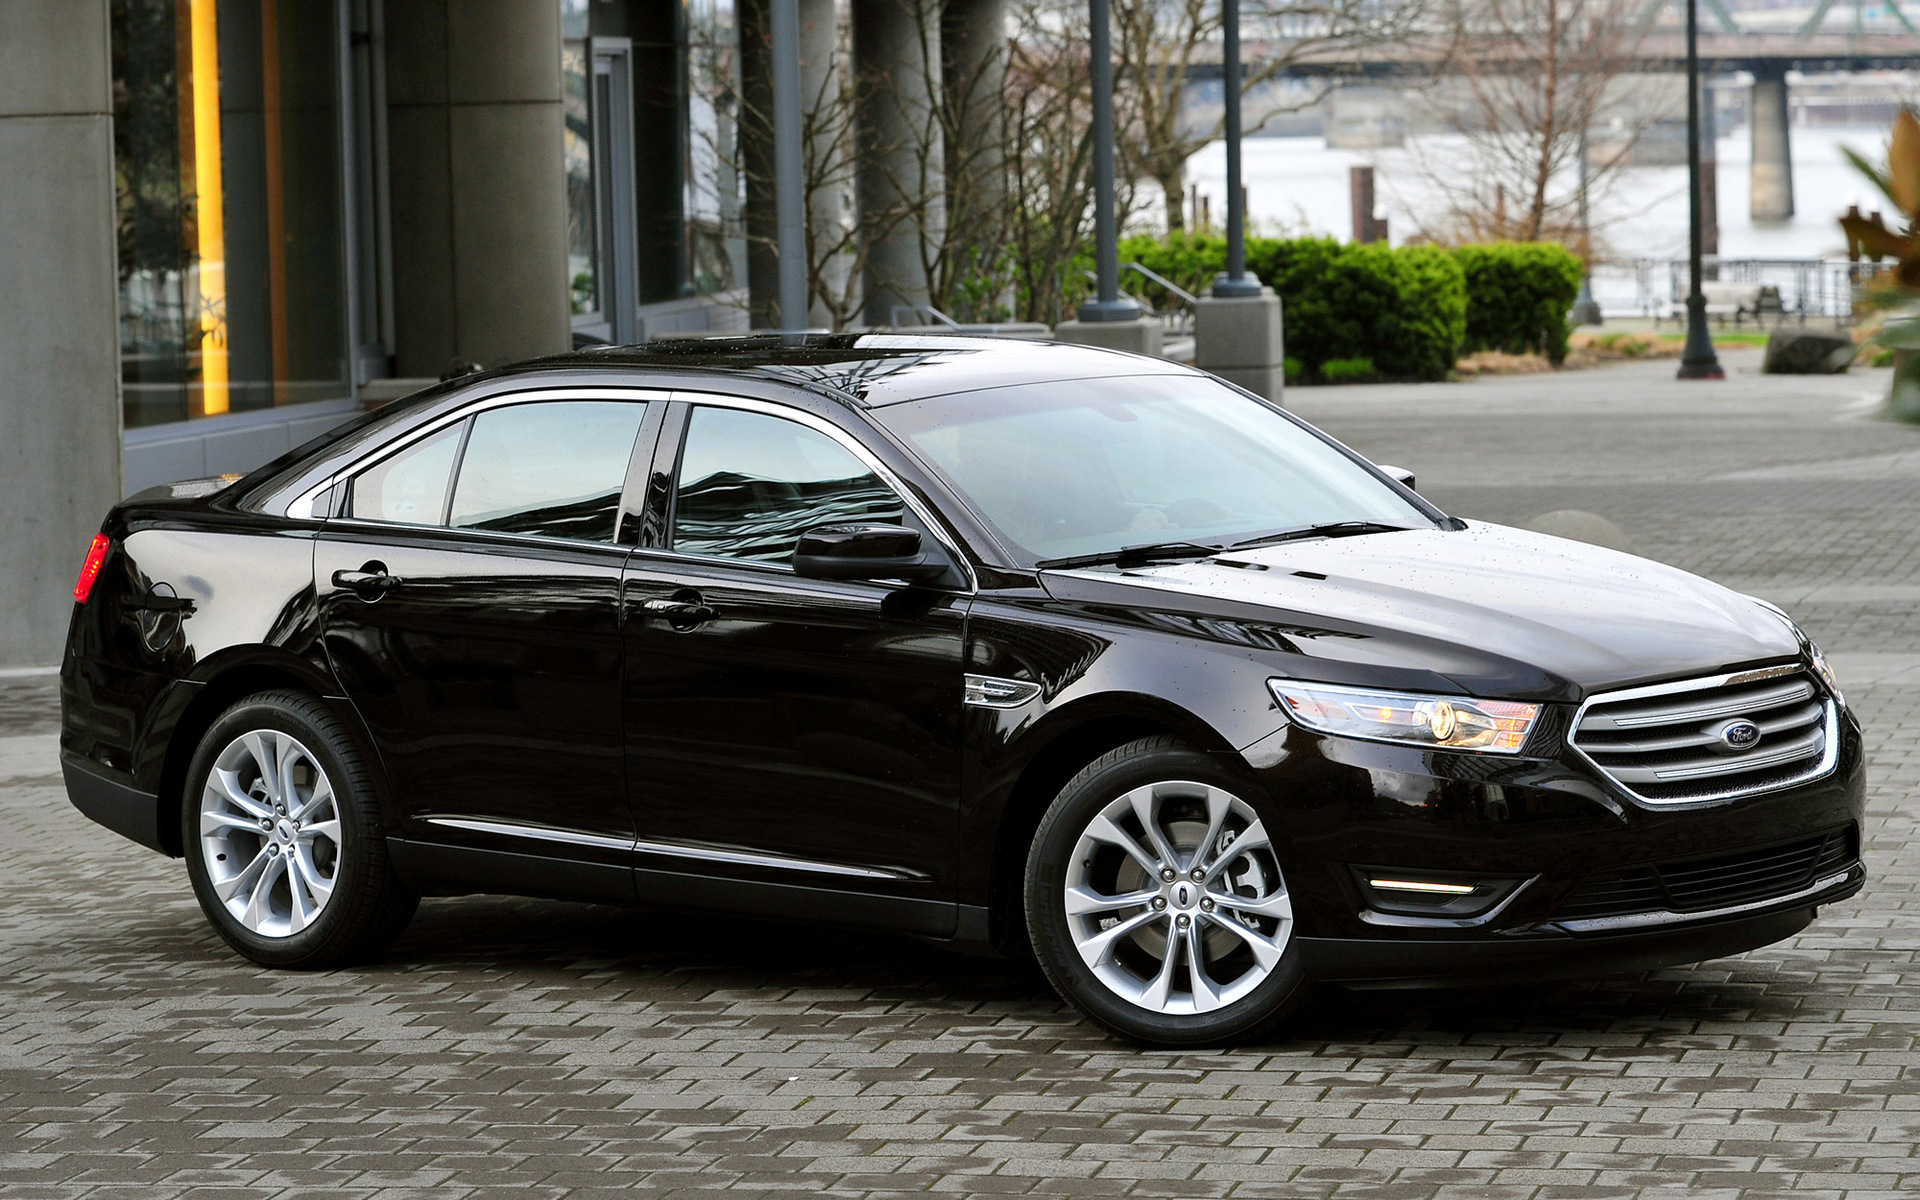 2013 Ford Taurus Sho Wallpapers